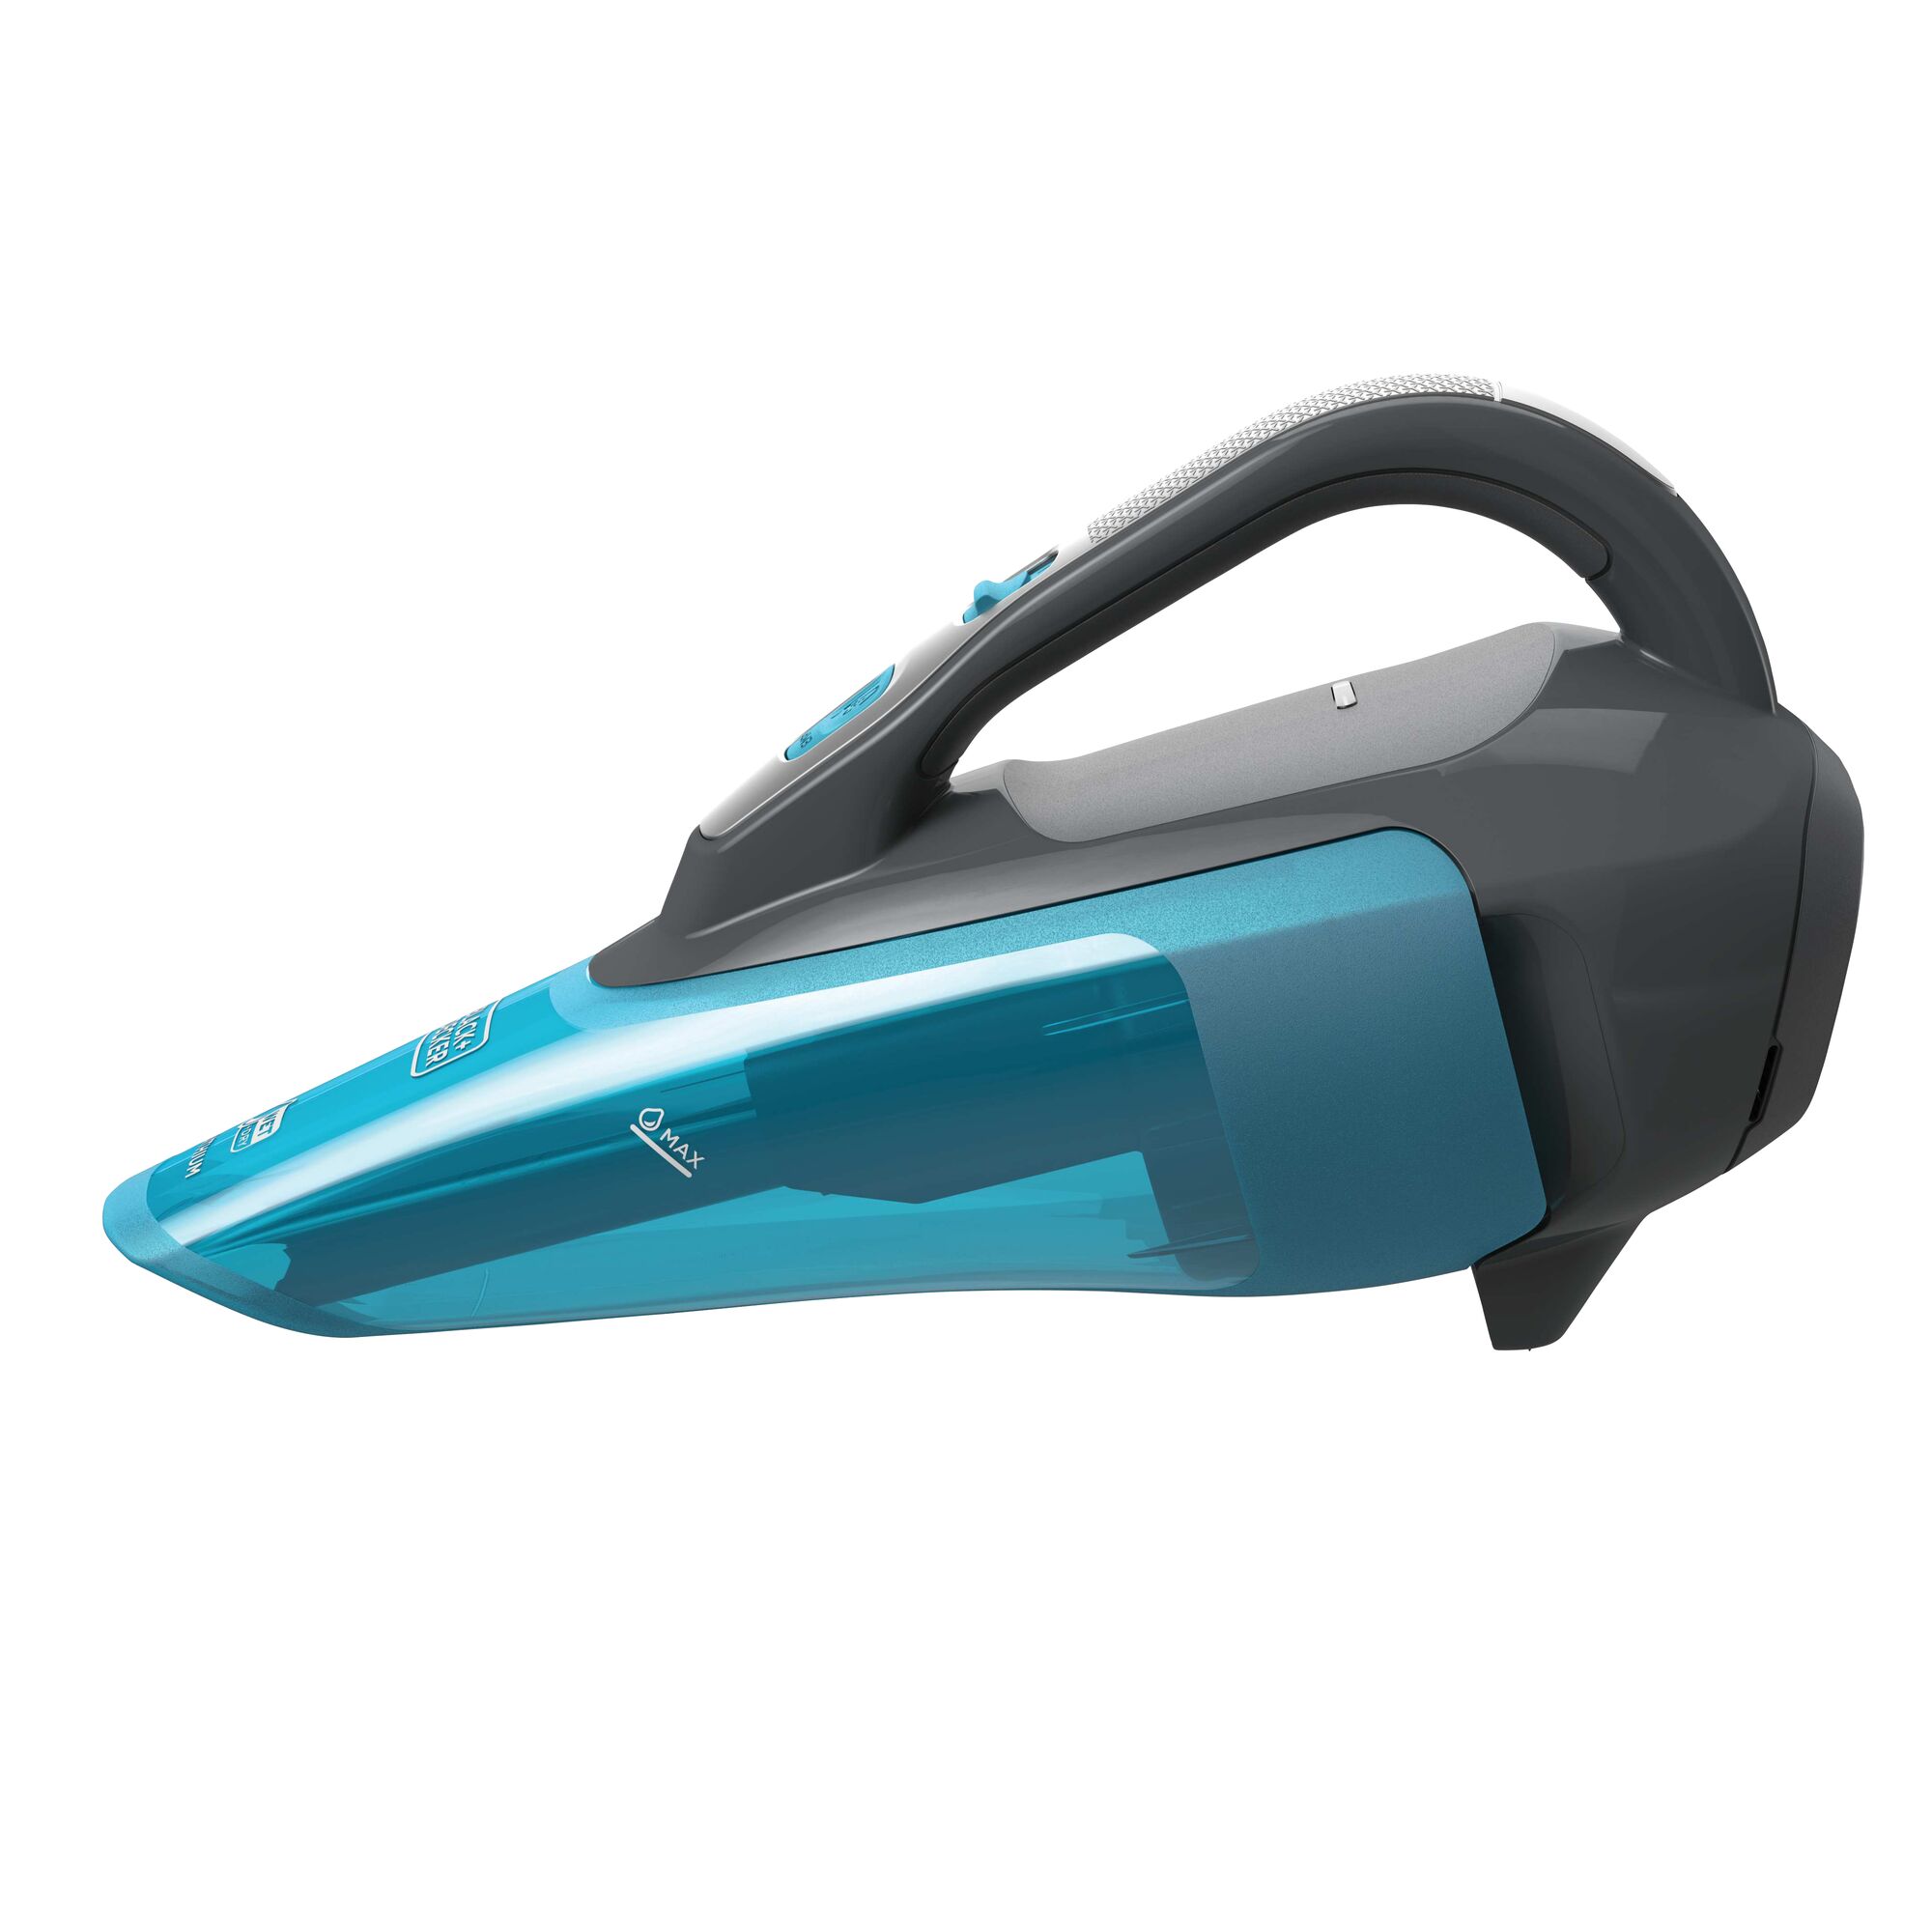 Profile of Dustbuster Advanced Clean Wet or Dry Cordless Hand Vacuum.